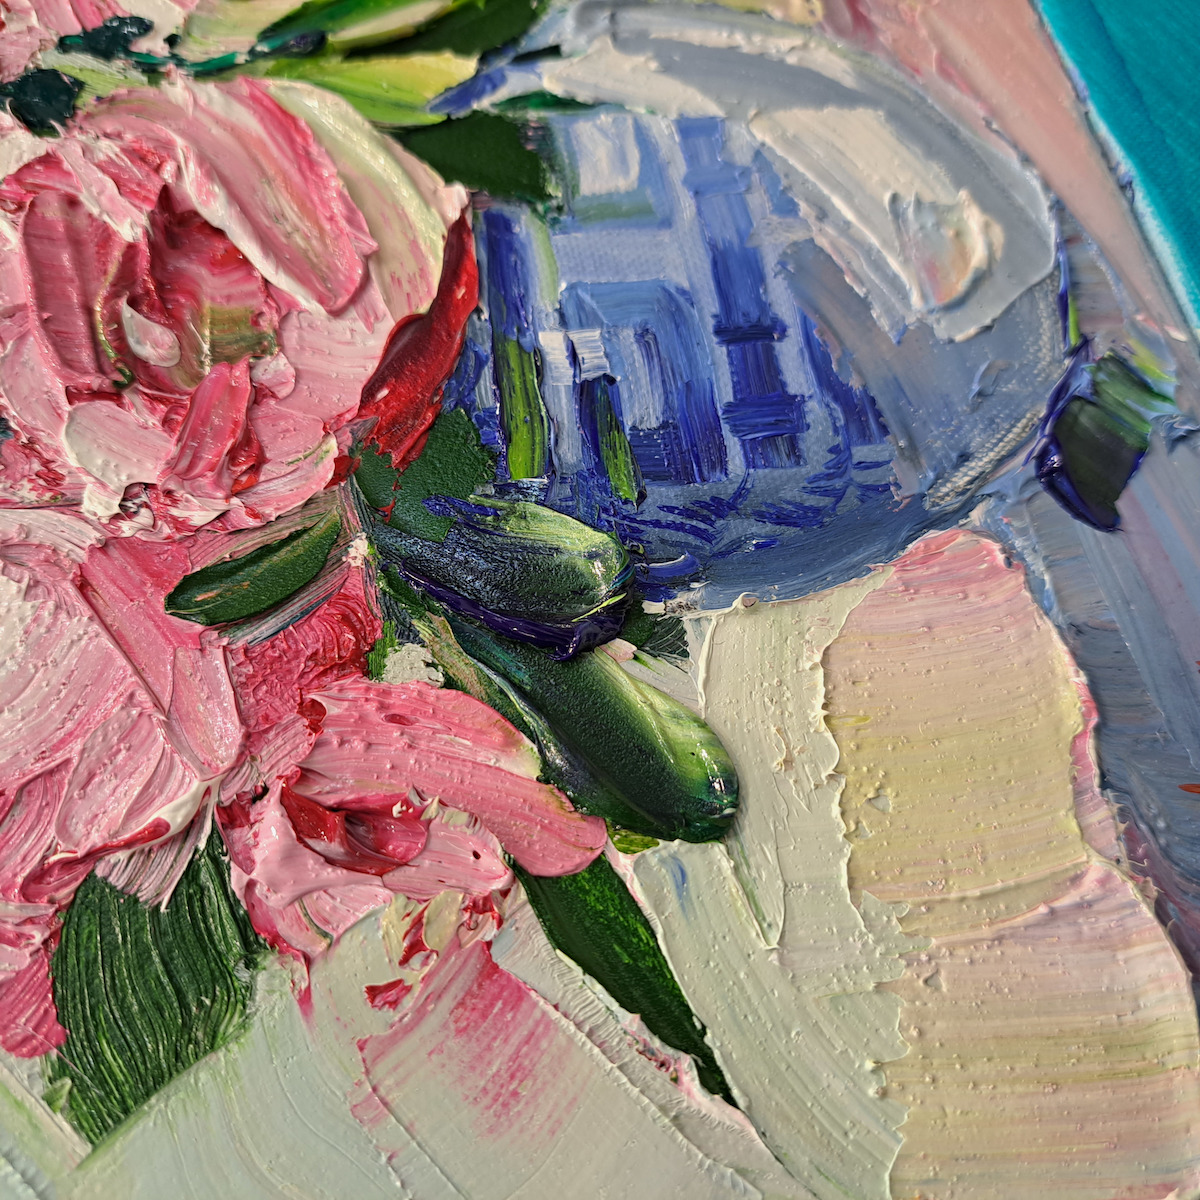 Creation Stage 1 Of Original Still Life Painting "Peonies in Ginger Jar" By Judith Dalozzo